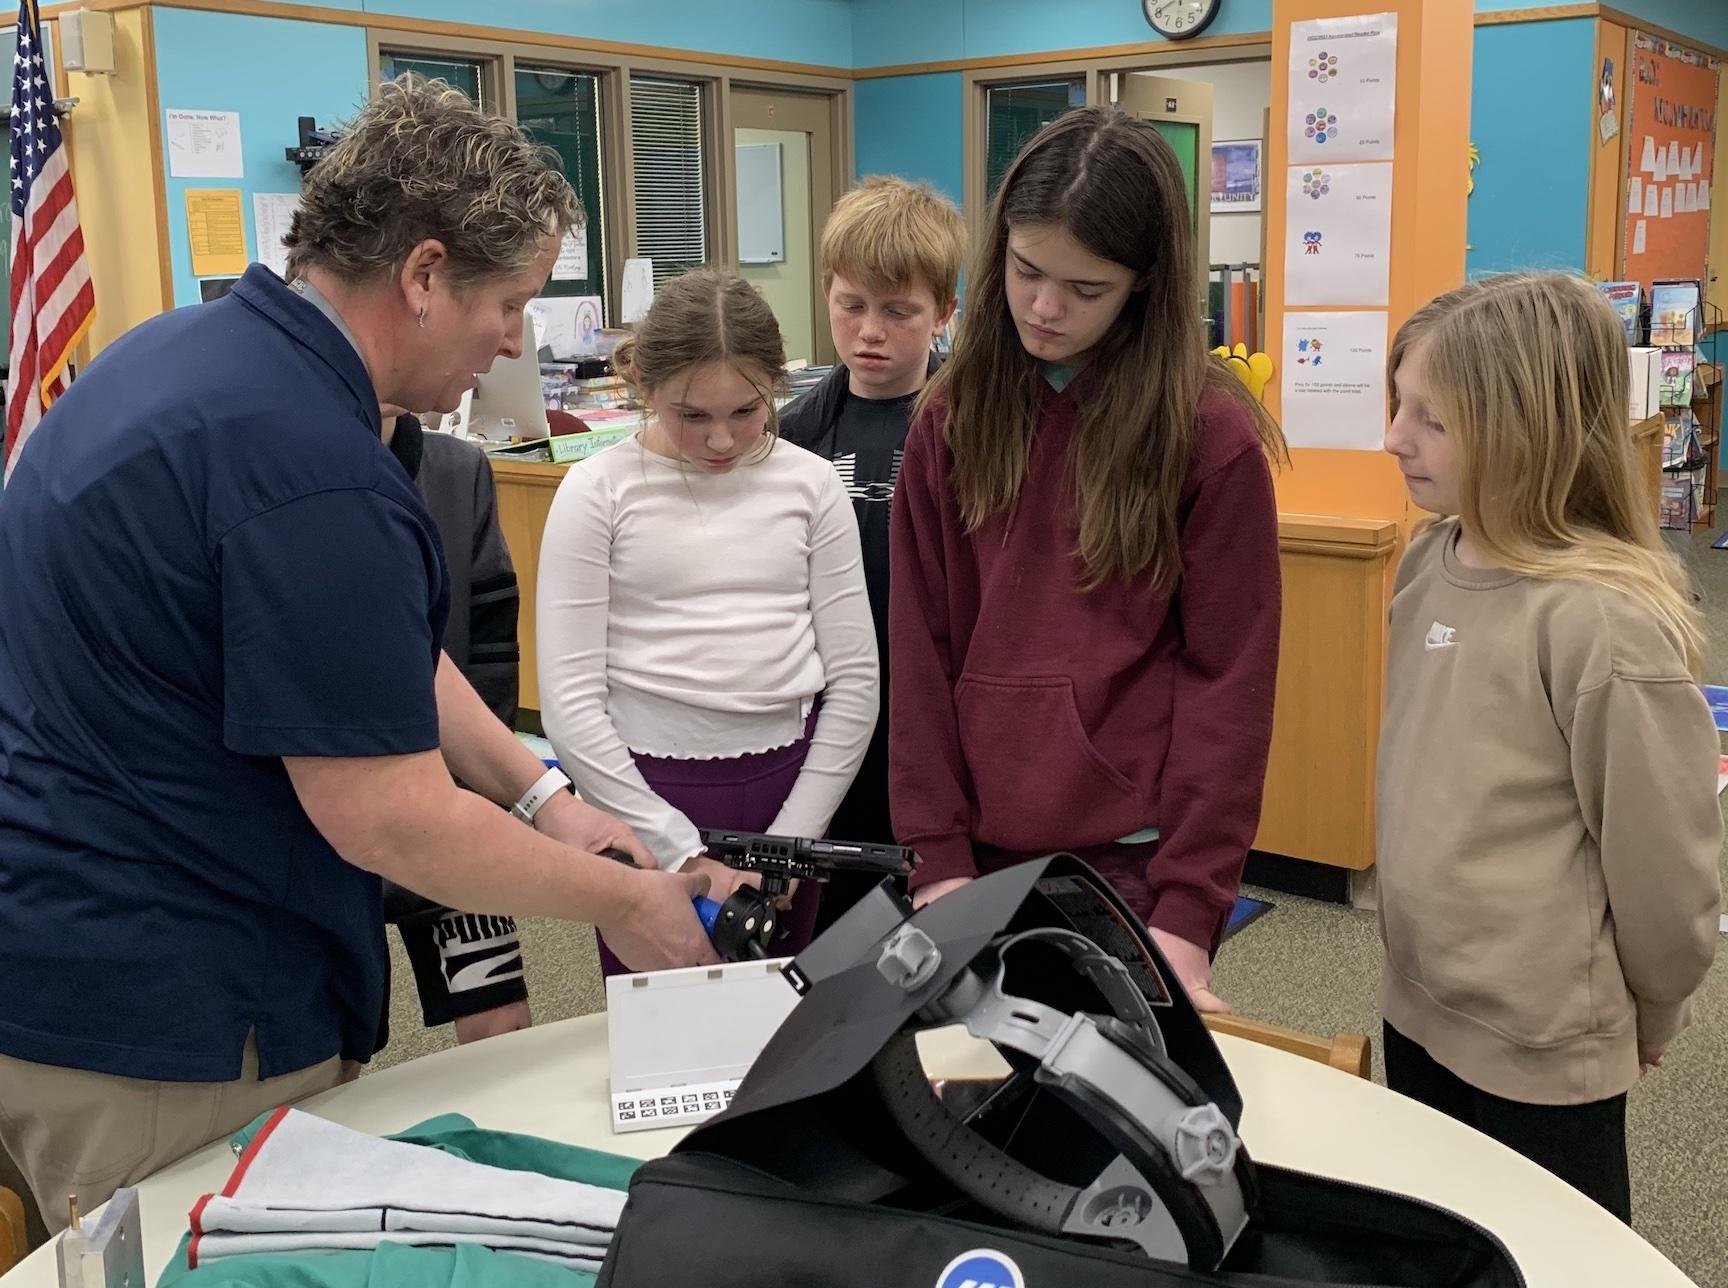 Michal Crist from CWCTC demonstrates the welding simulator to Harrison Park students, Ella Hileman, Dominic Capezzuto, Haydon Fitzgerald, and Natalie Sterner